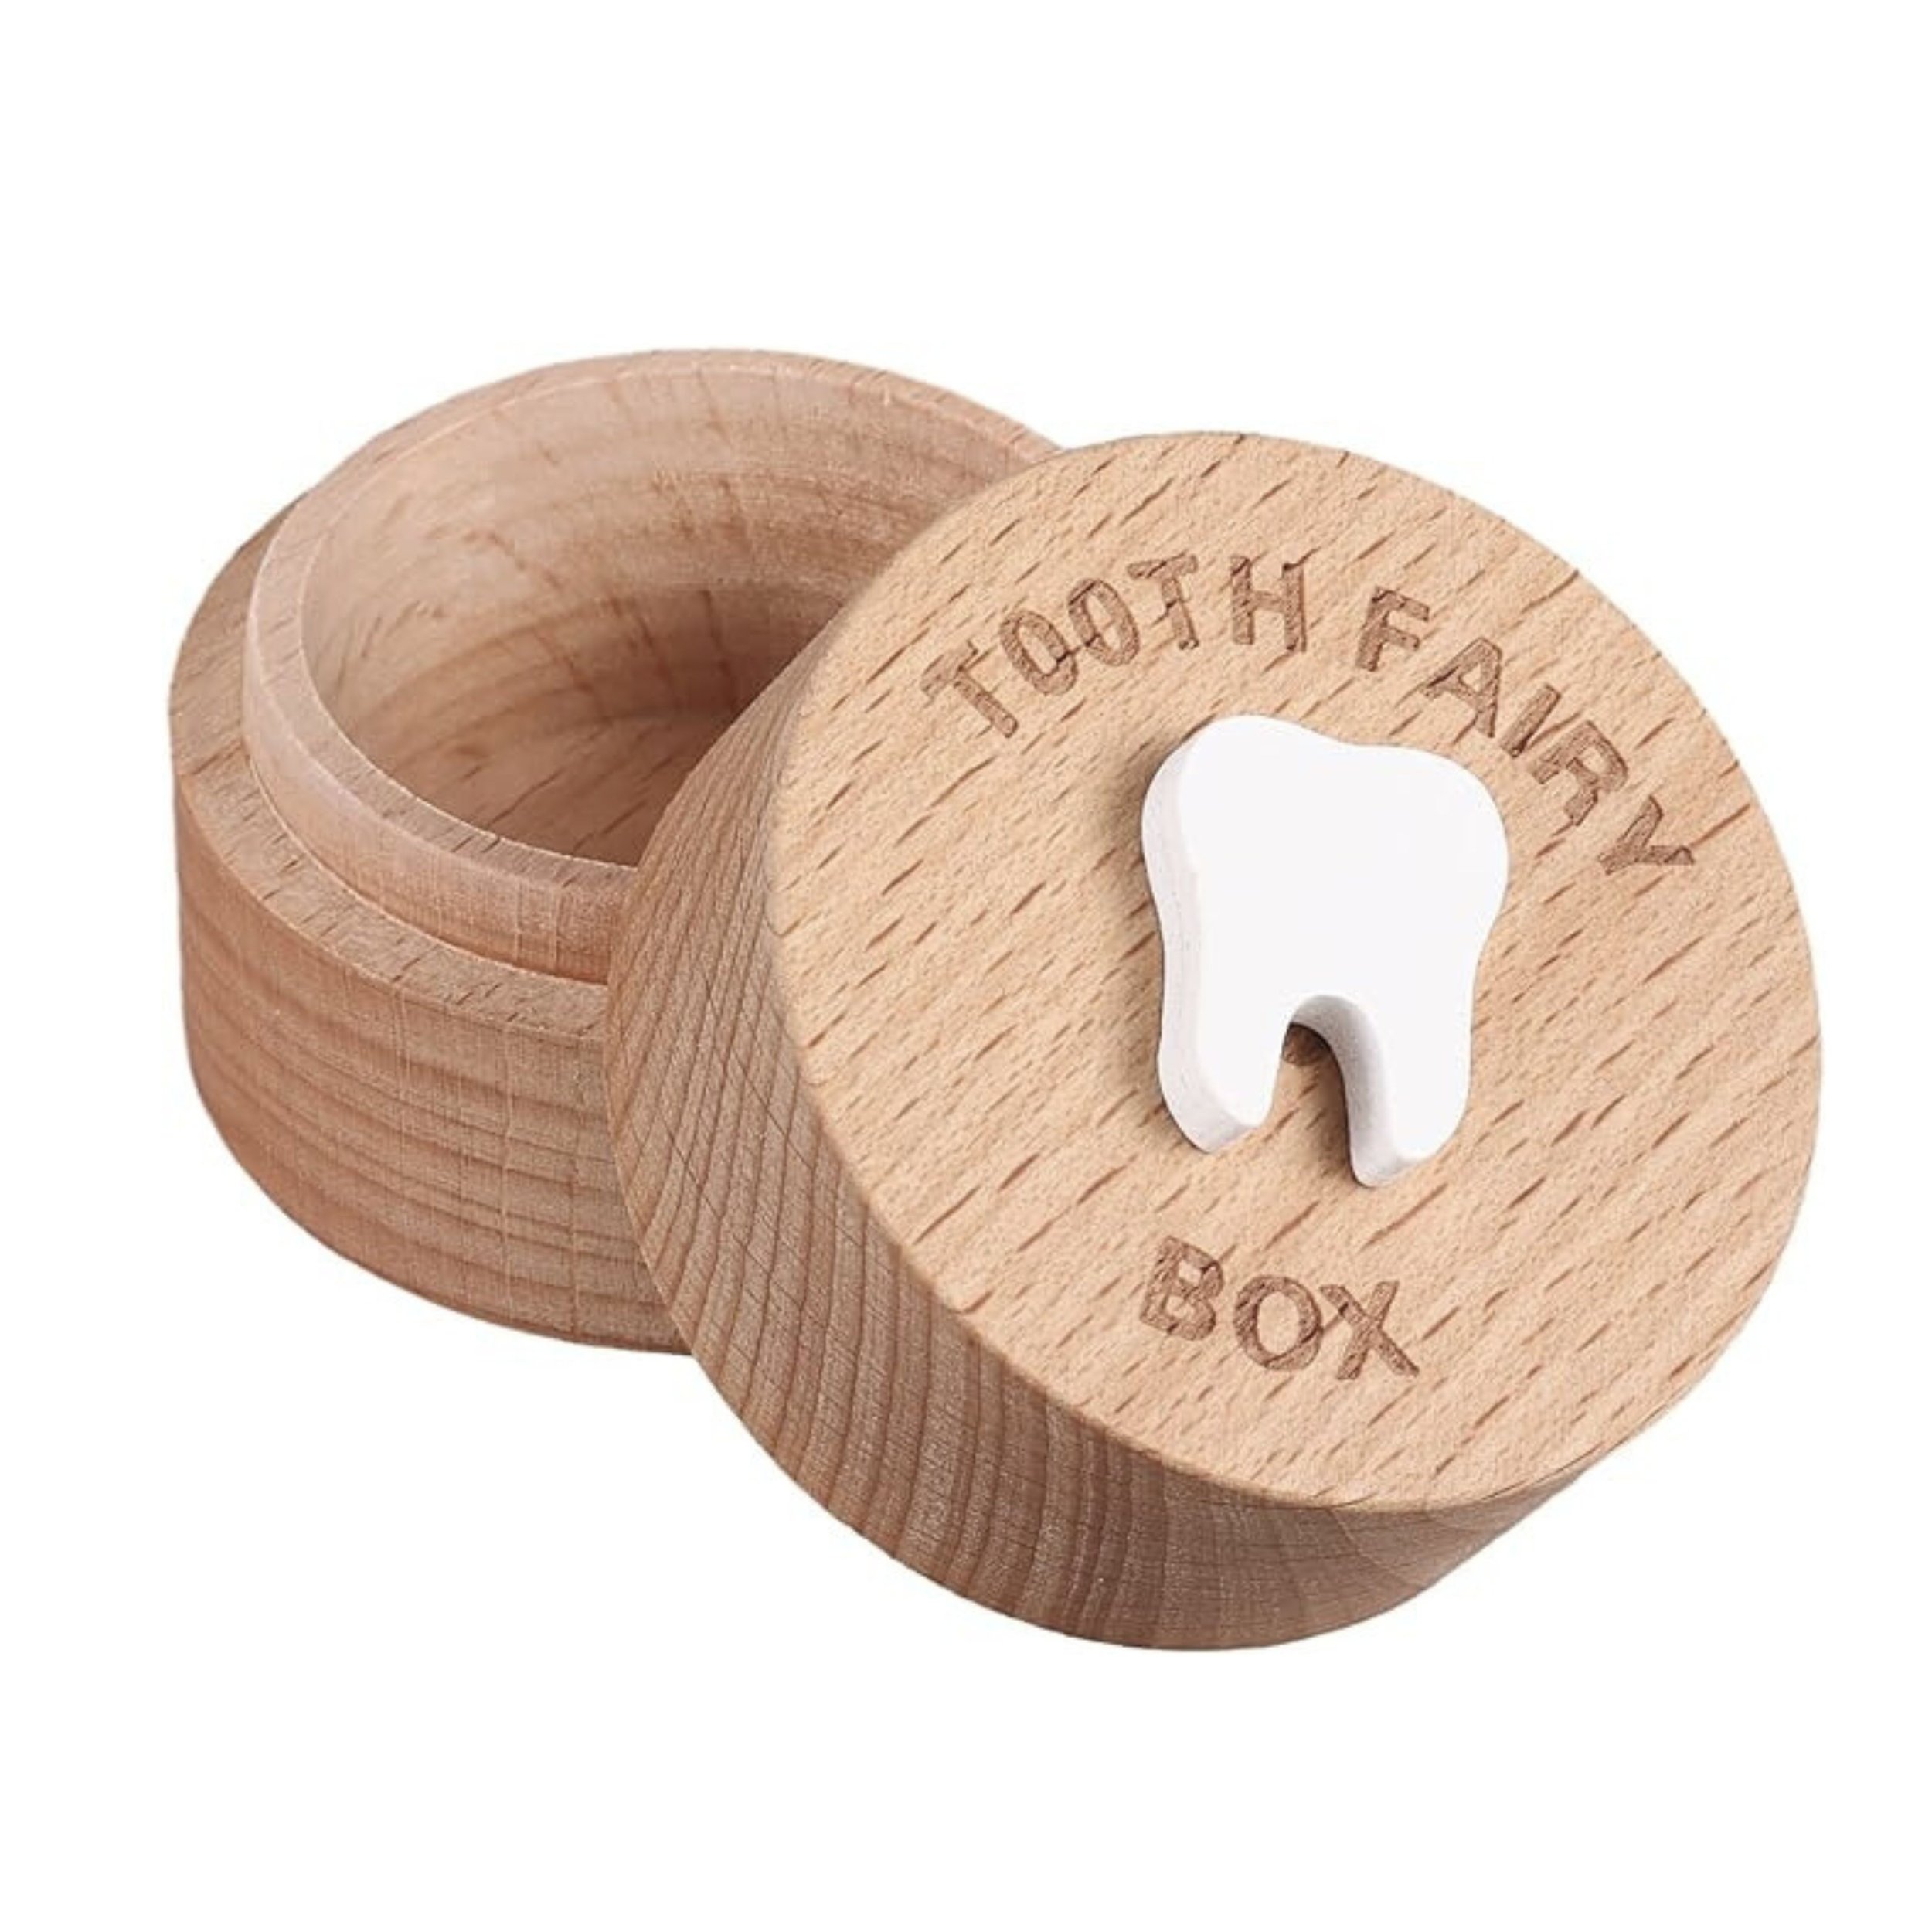 LUTER Wood Tooth Box